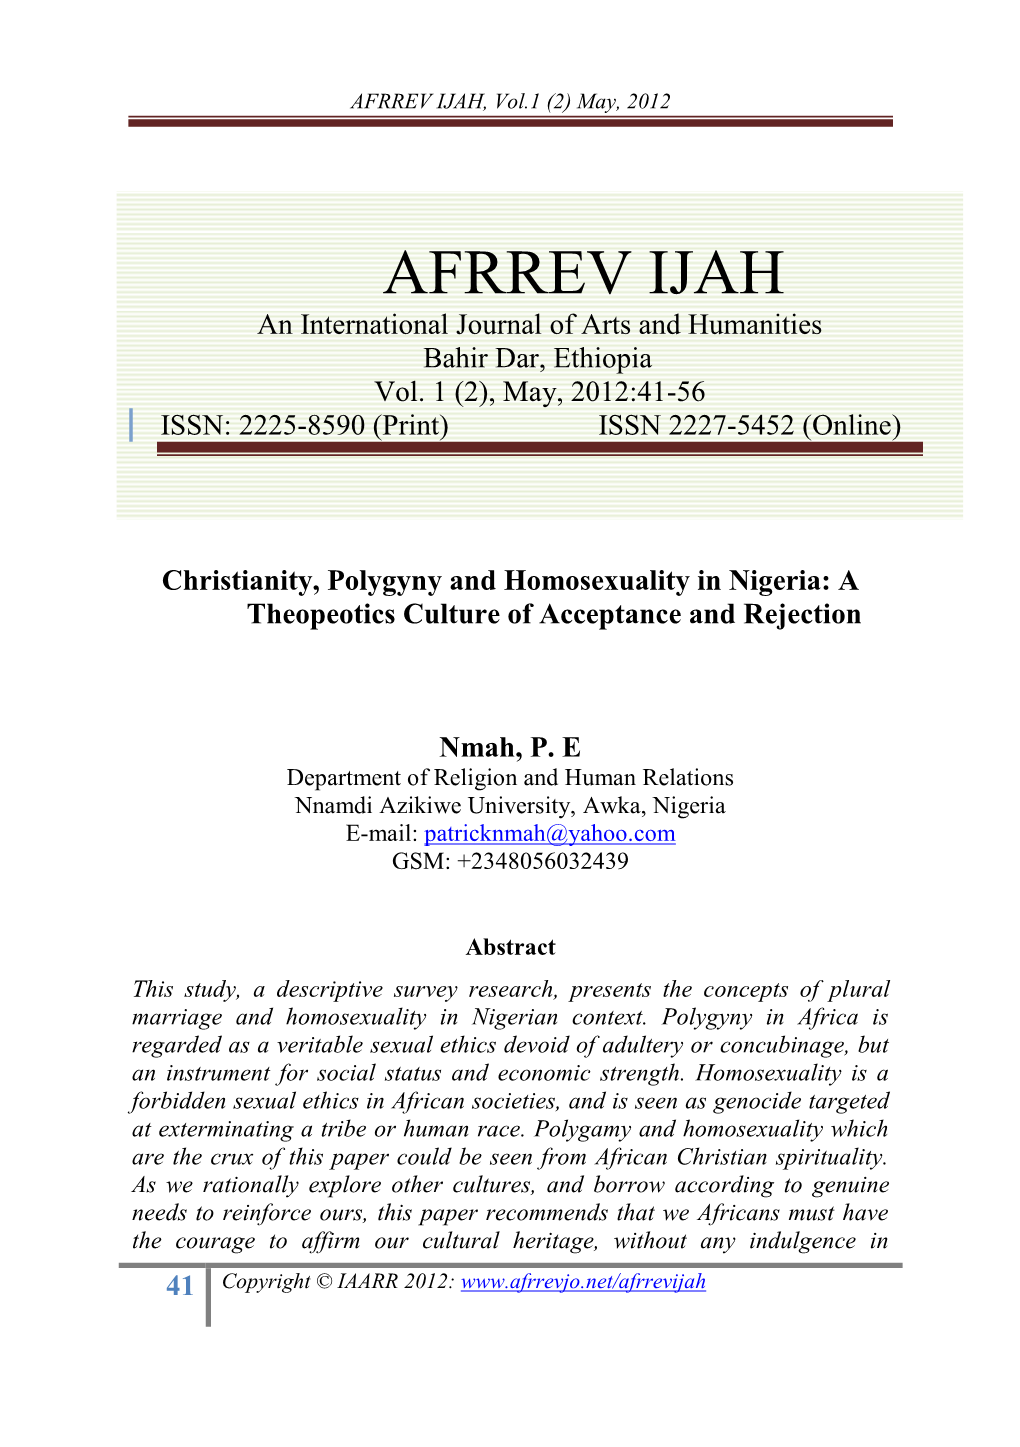 Christianity and Community Development in Igboland, 1960-2000